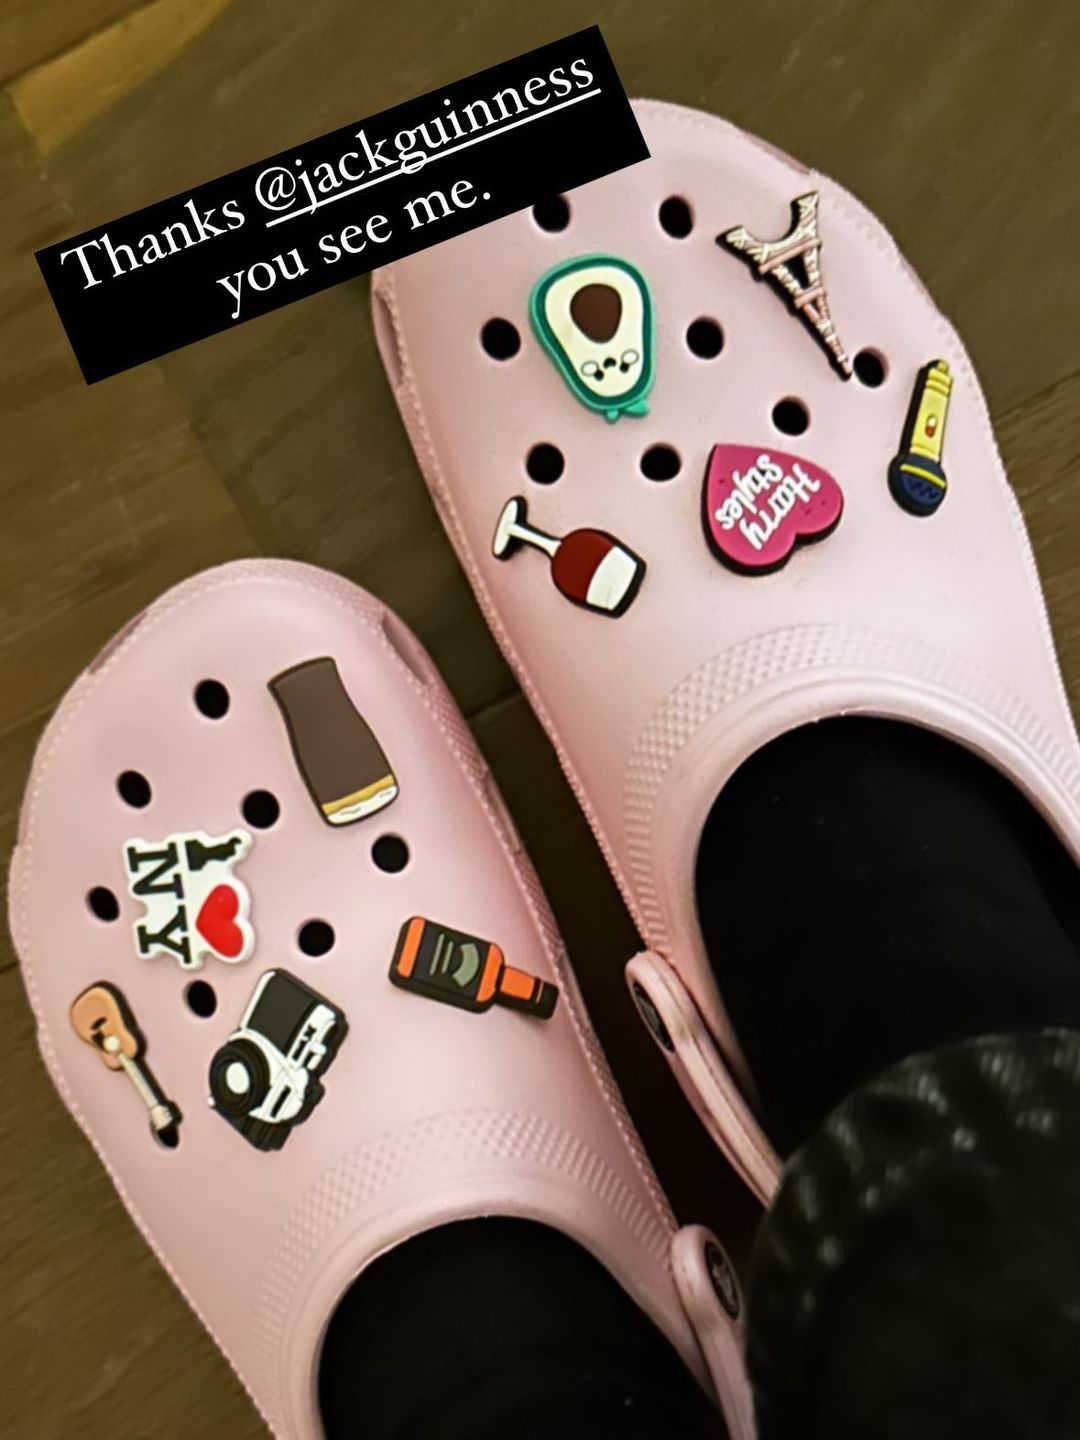 Alexa Chung shared the photo of the unconventional Crocs on her Instagram story